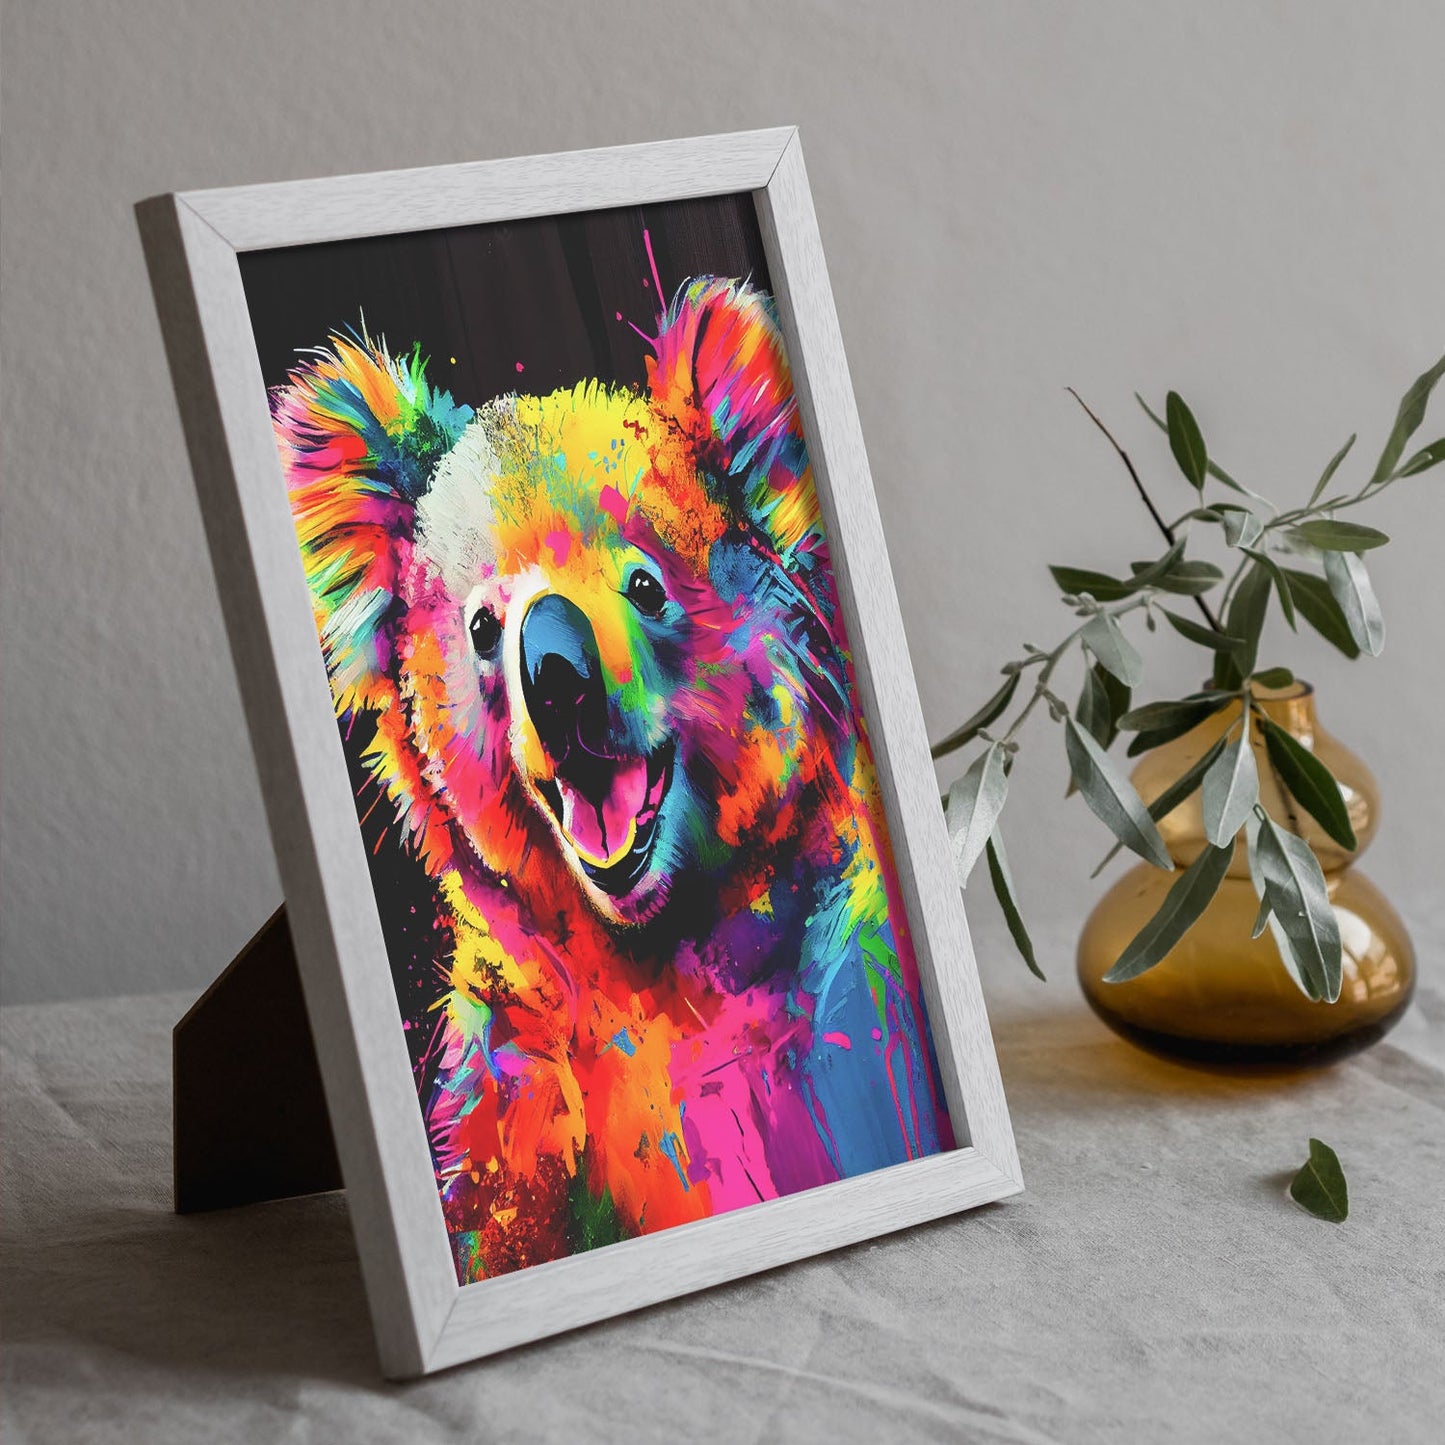 Nacnic Abstract smiling Koala in Lisa Fran Style_2. Aesthetic Wall Art Prints for Bedroom or Living Room Design.